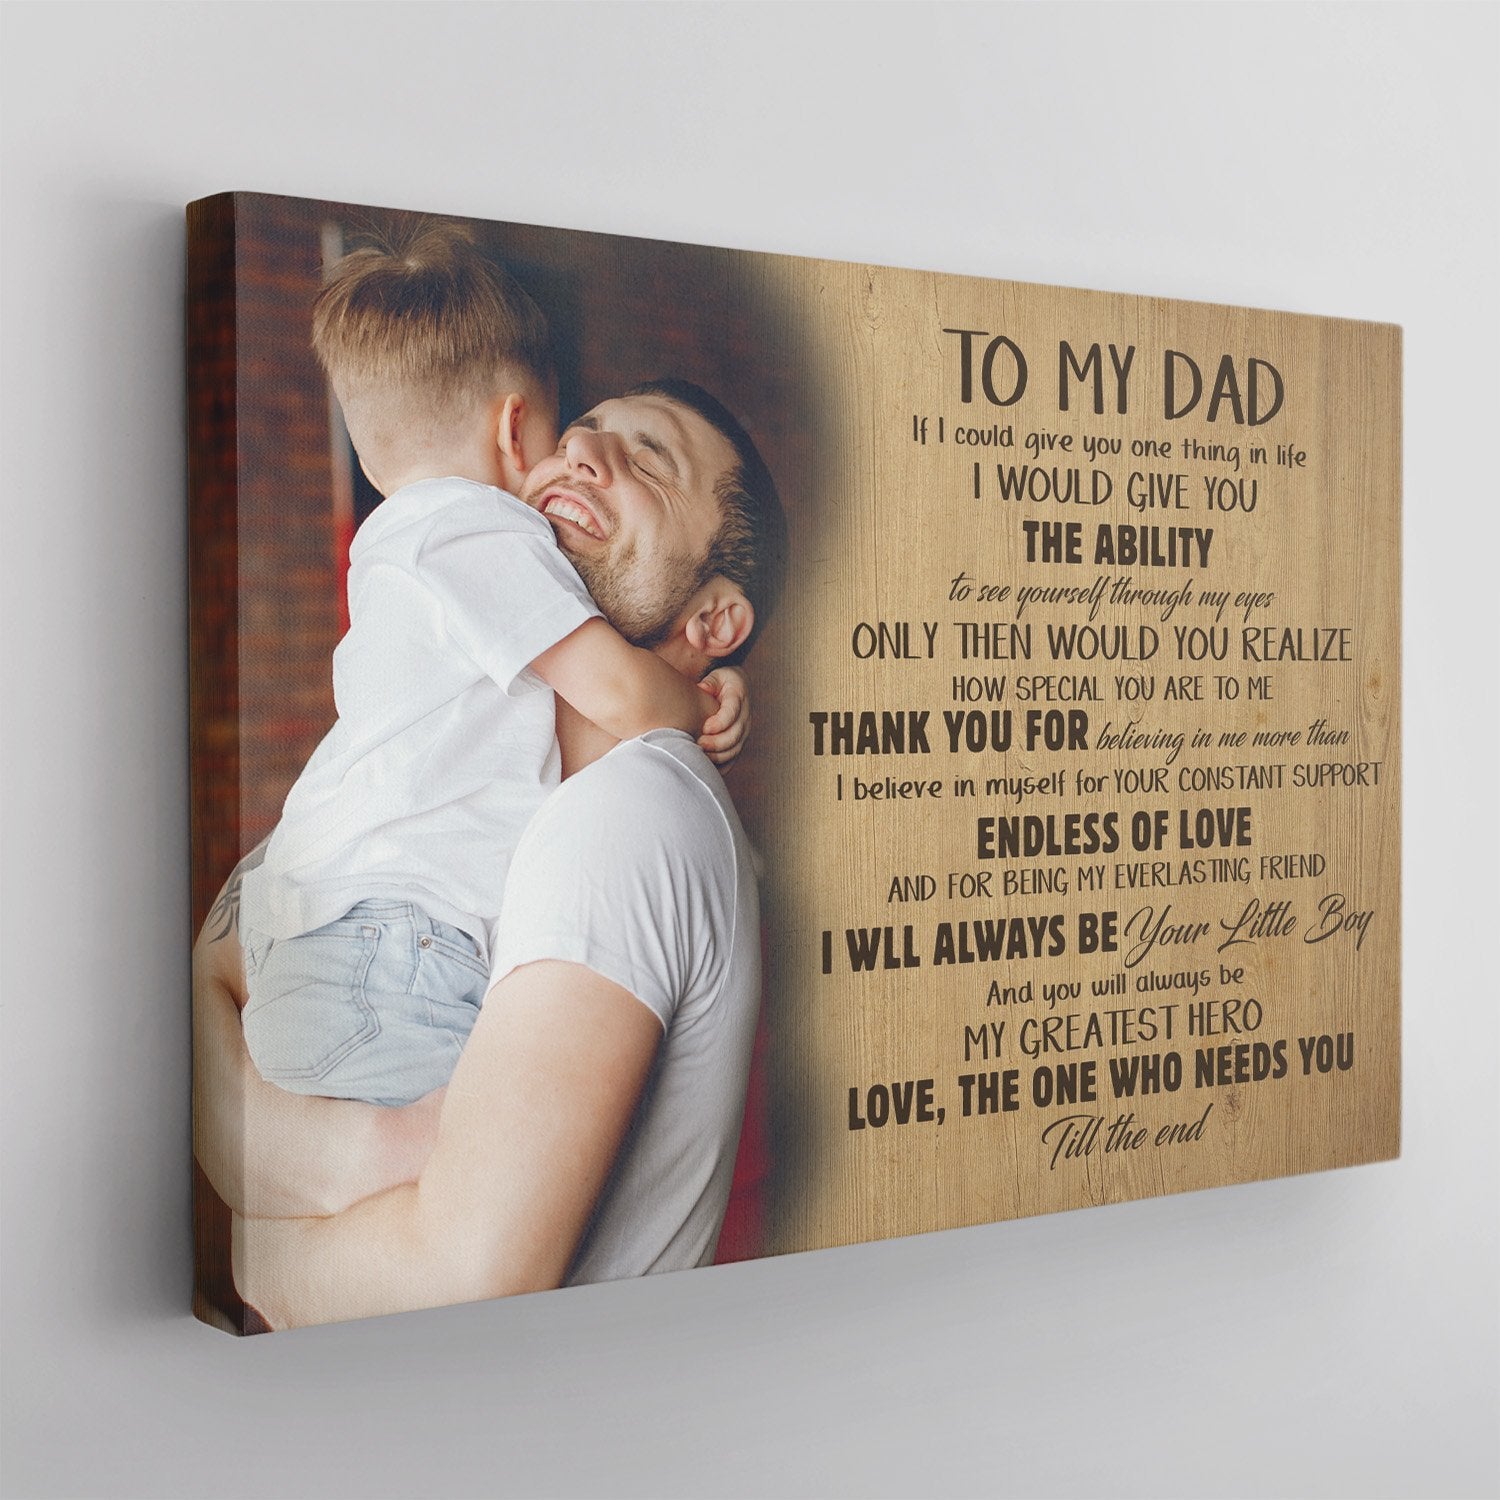 To My Dad, My Greatest Hero, Love The One Who Needs You, Custom Photo, Canvas Wall Art